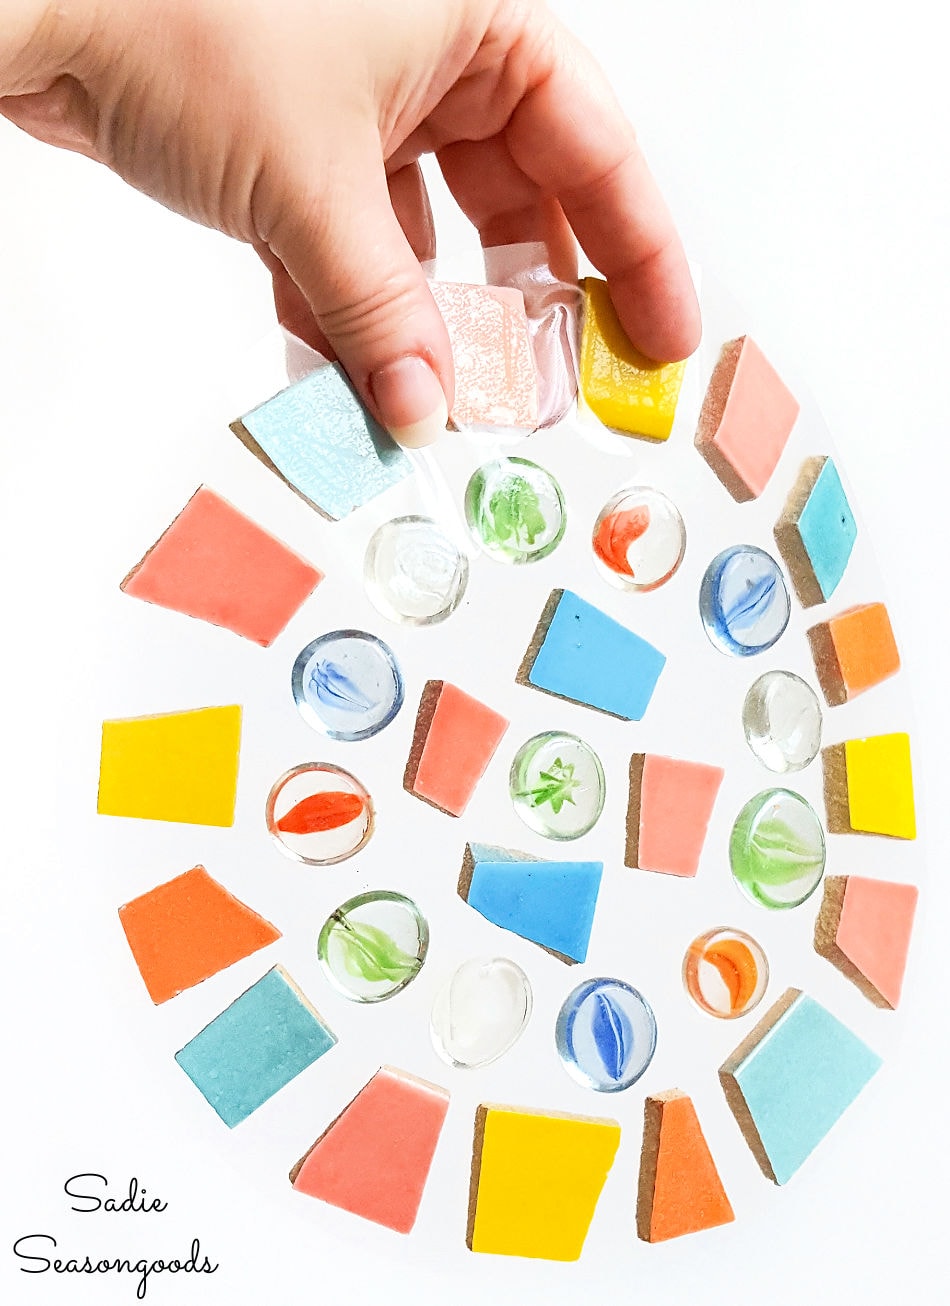 Tile and glass gems for a DIY mosaic stepping stone